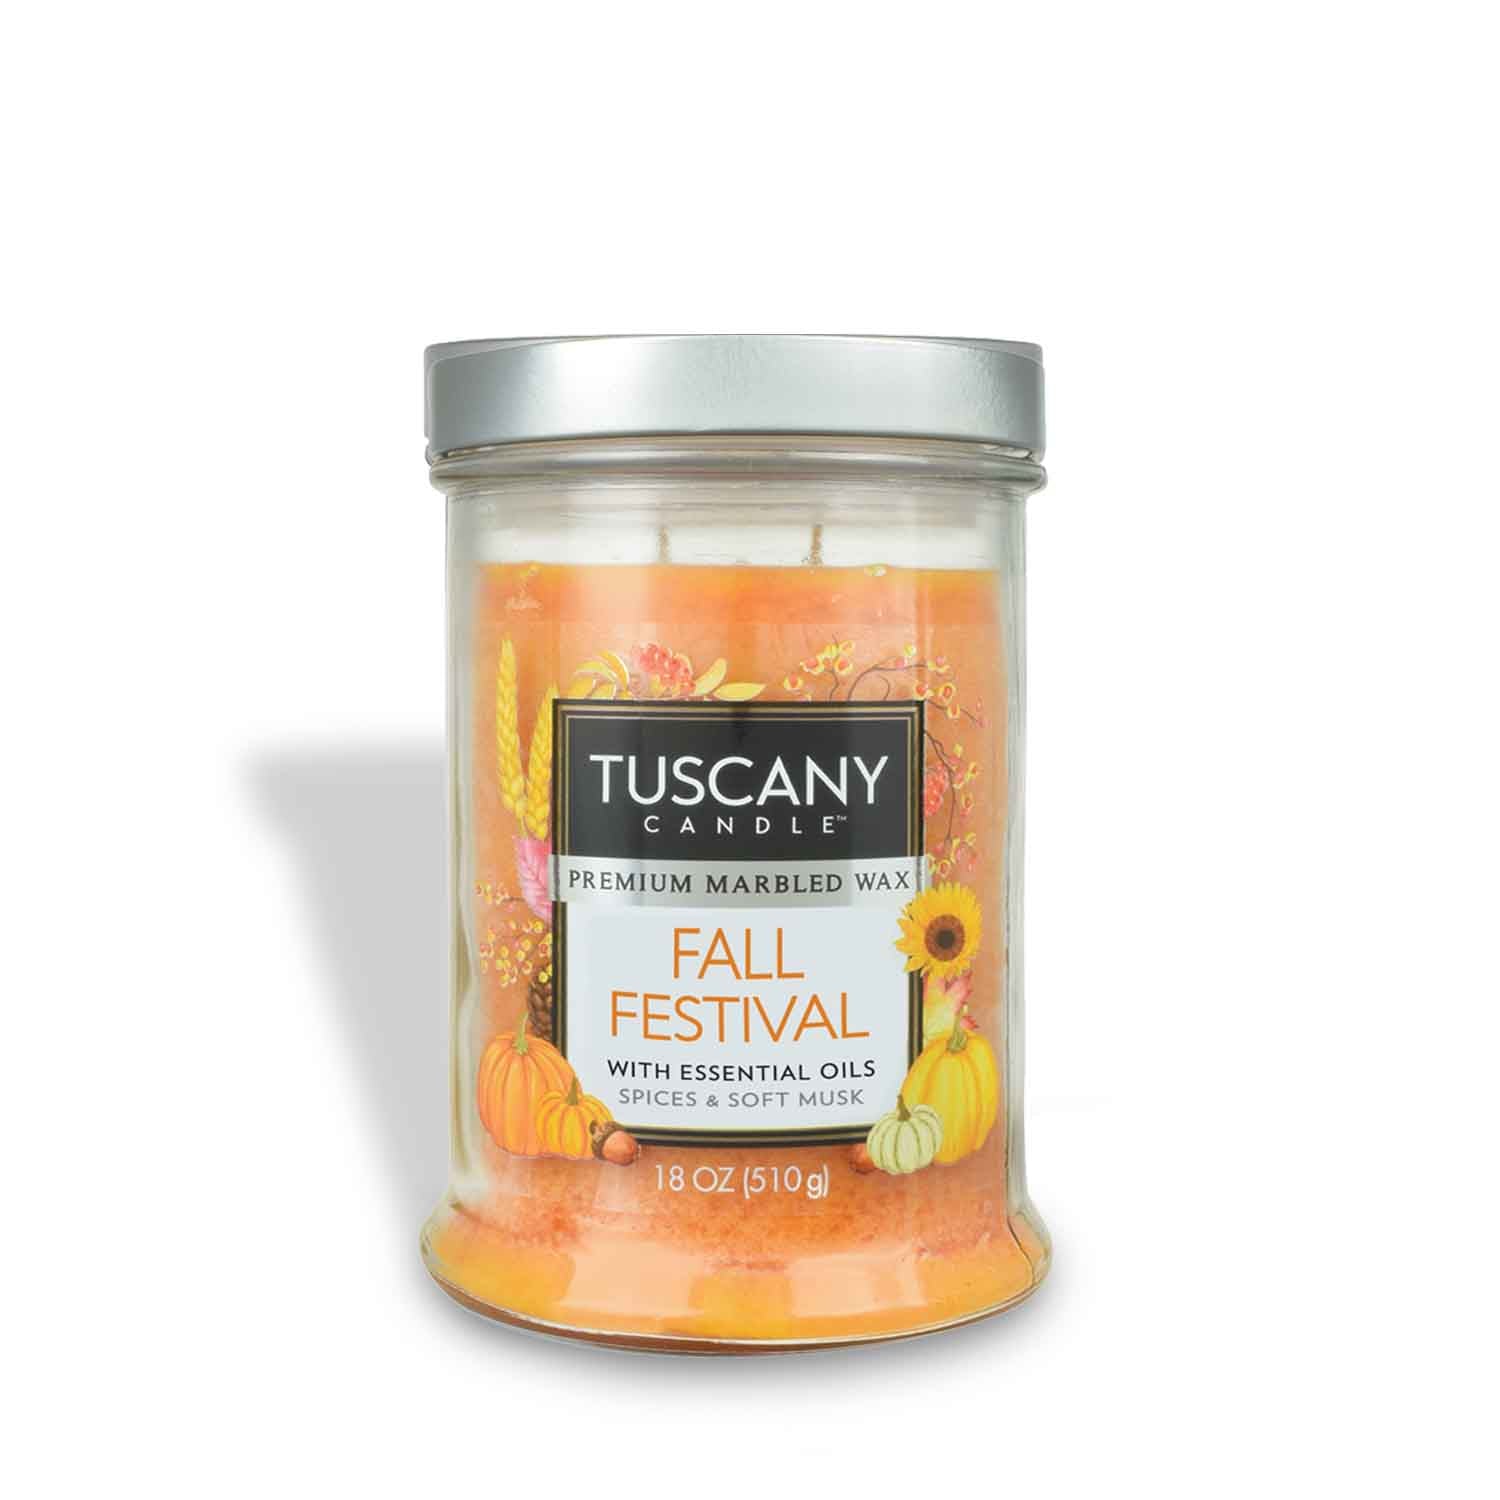 Tuscany fall festival jar candle, perfect for creating an enchanting ambiance during the fall season. This Fall Festival Long-Lasting Scented Jar Candle (18 oz) from Tuscany Candle offers long-lasting enjoyment with its captivating fragrance.